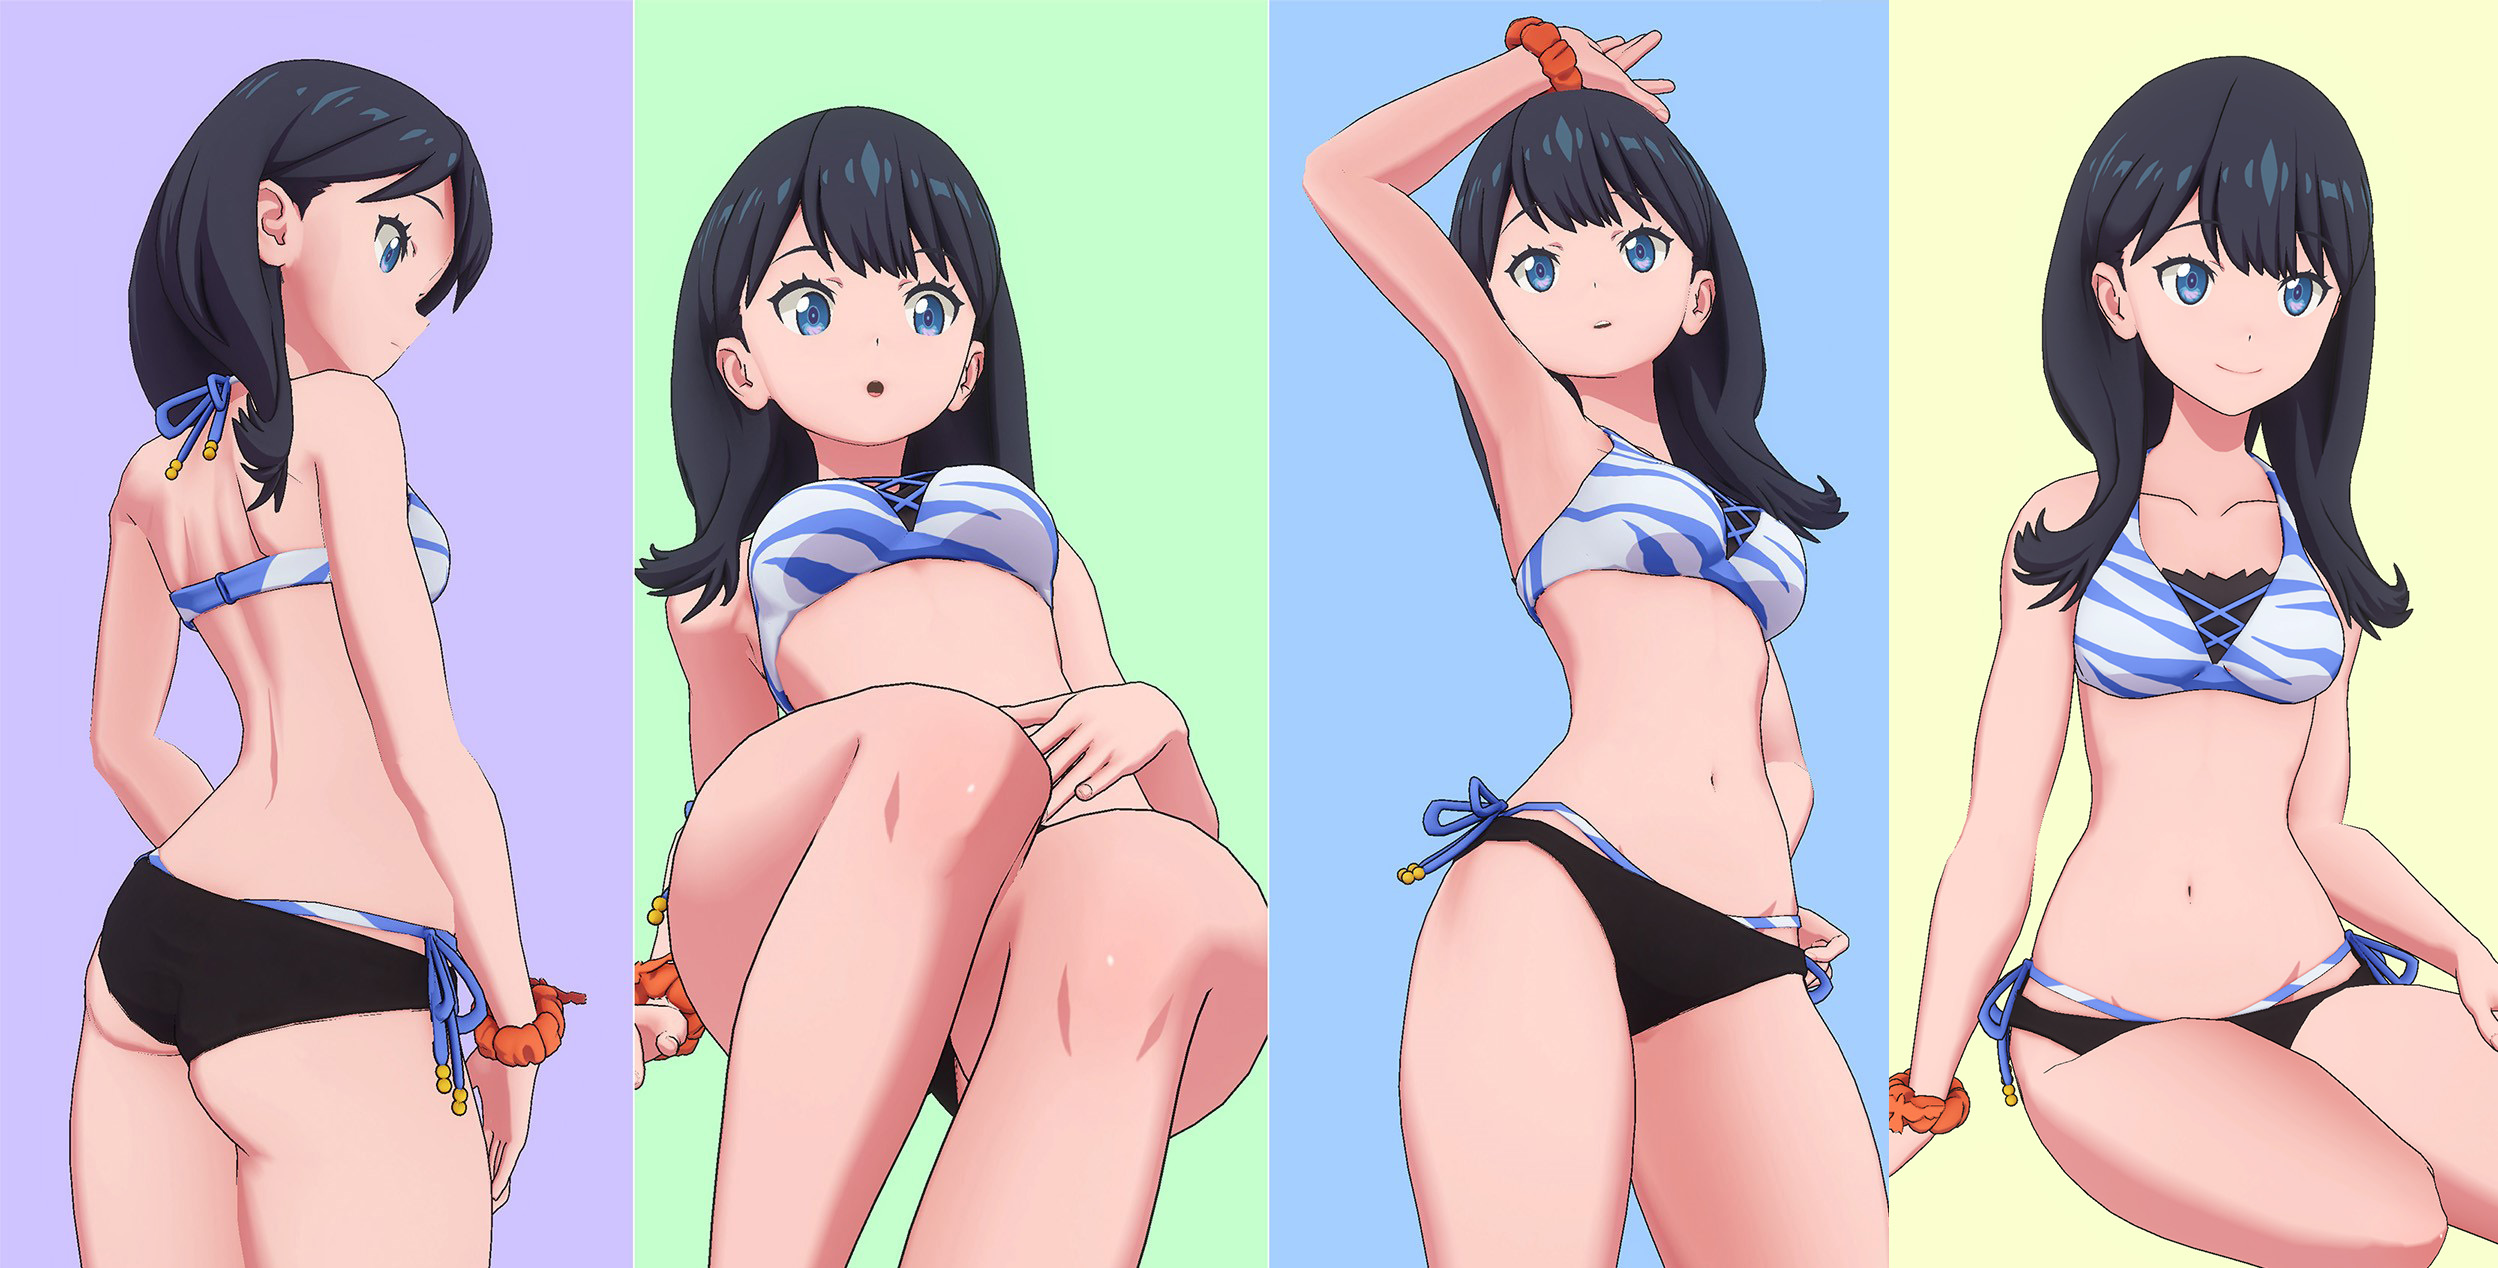 Rikka Takarada (Swimsuit Costume) is the second figure from 